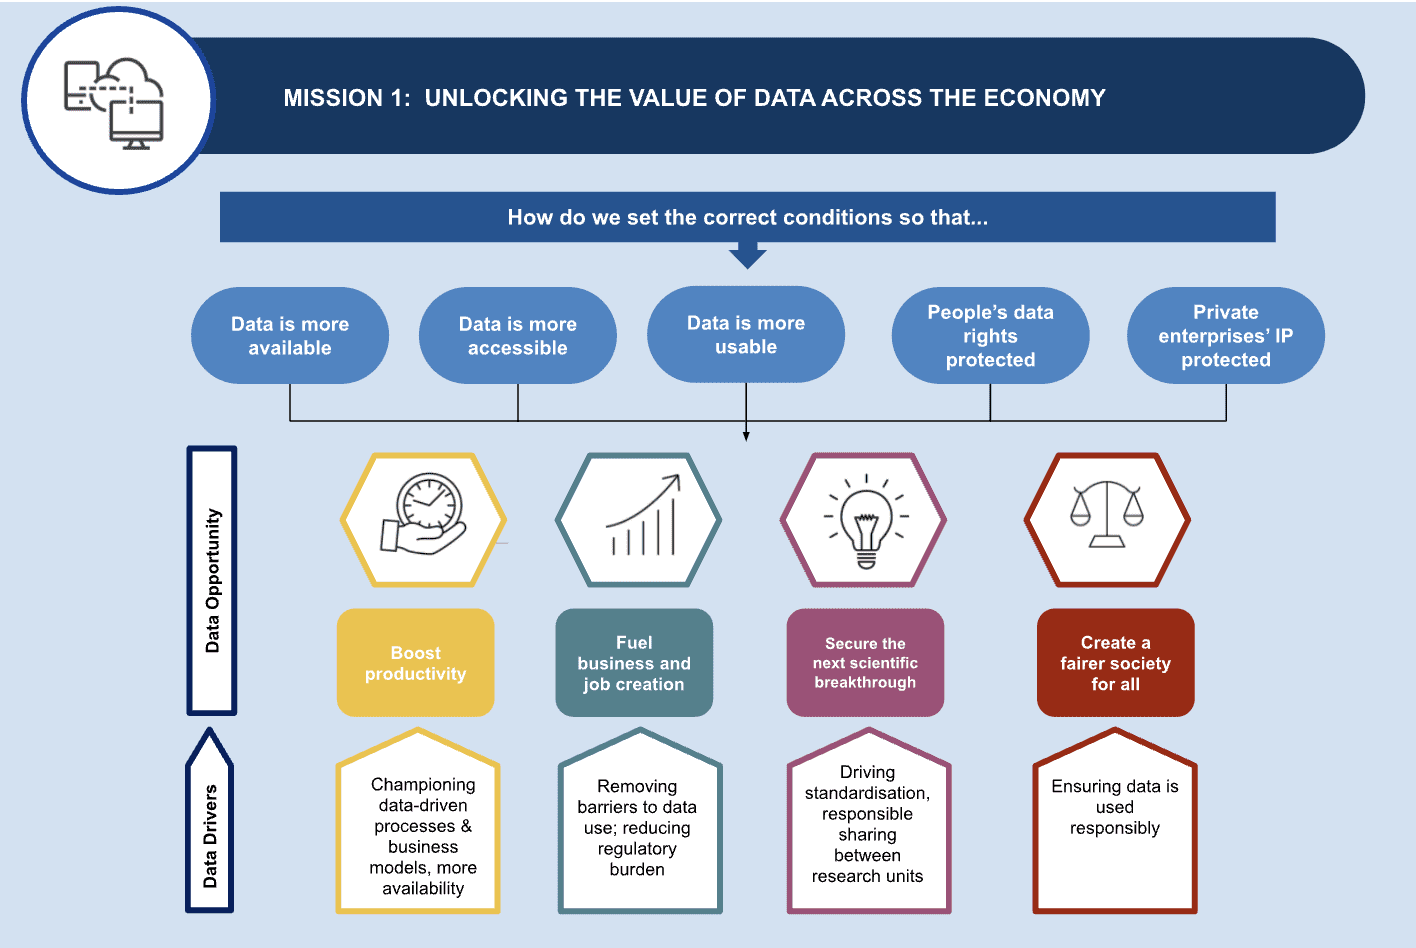 Unlocking the Value of Data Across the Economy infographic from The Department for Culture, Media and Sport